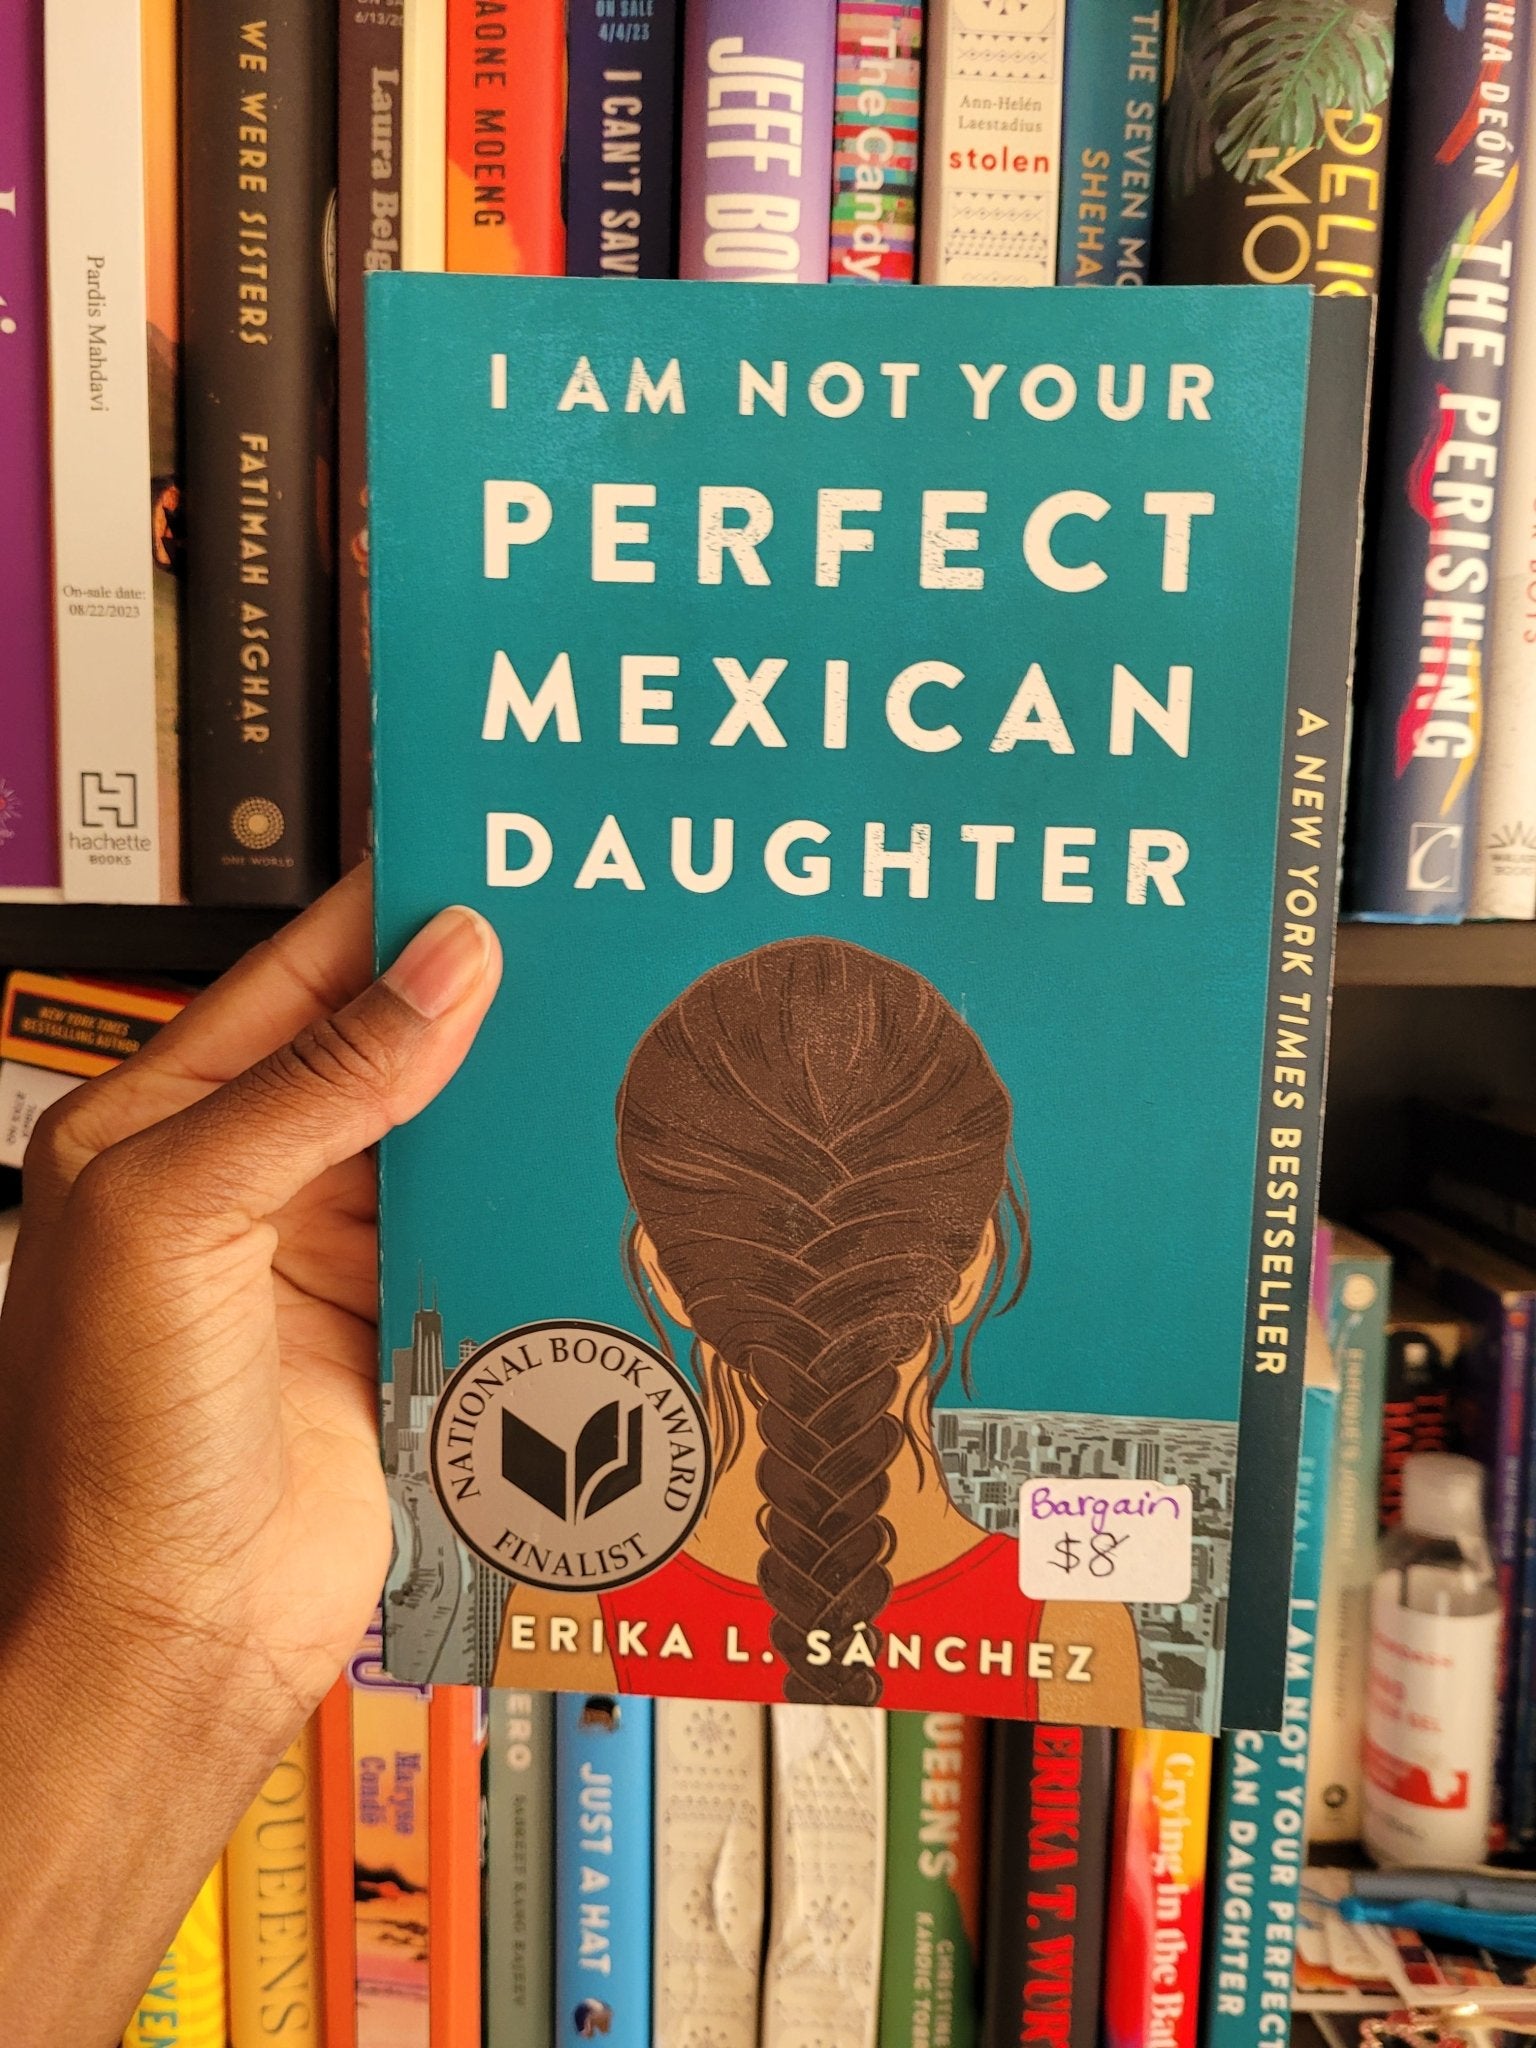 I Am Not Your Perfect Mexican Daughter by Erika L. Sánchez - 9781524700515 - Tuma's Books